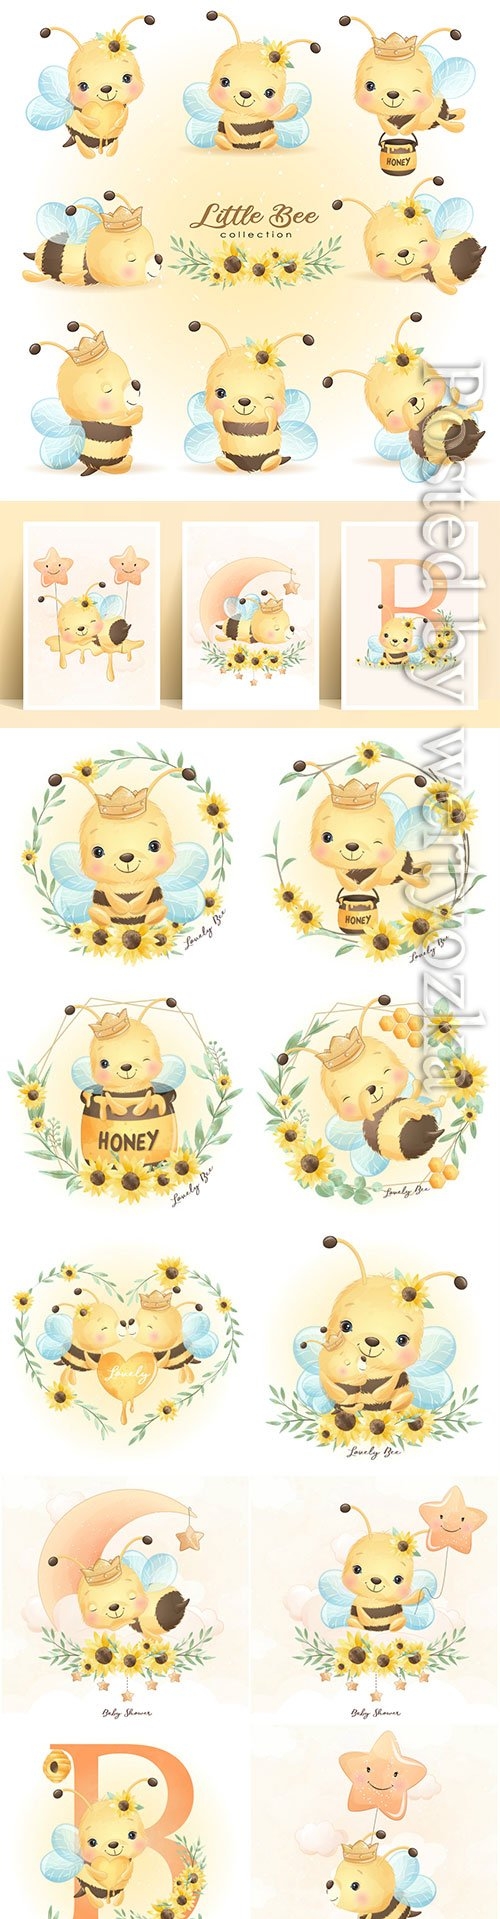 Cute doodle bee poses with floral collection premium vector